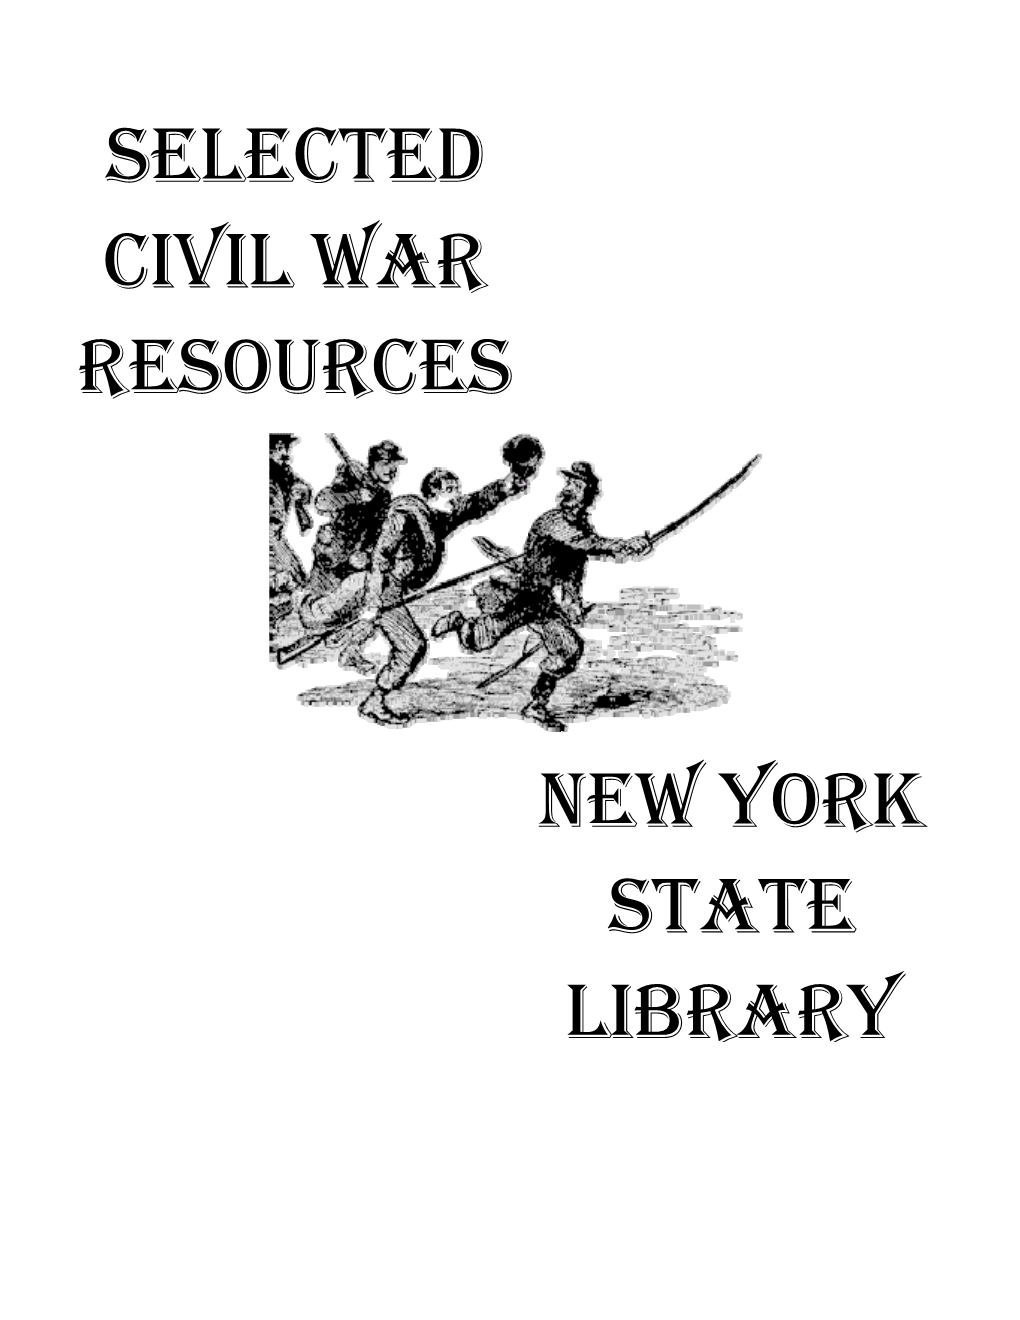 American Civil War Resources at the NYS Library